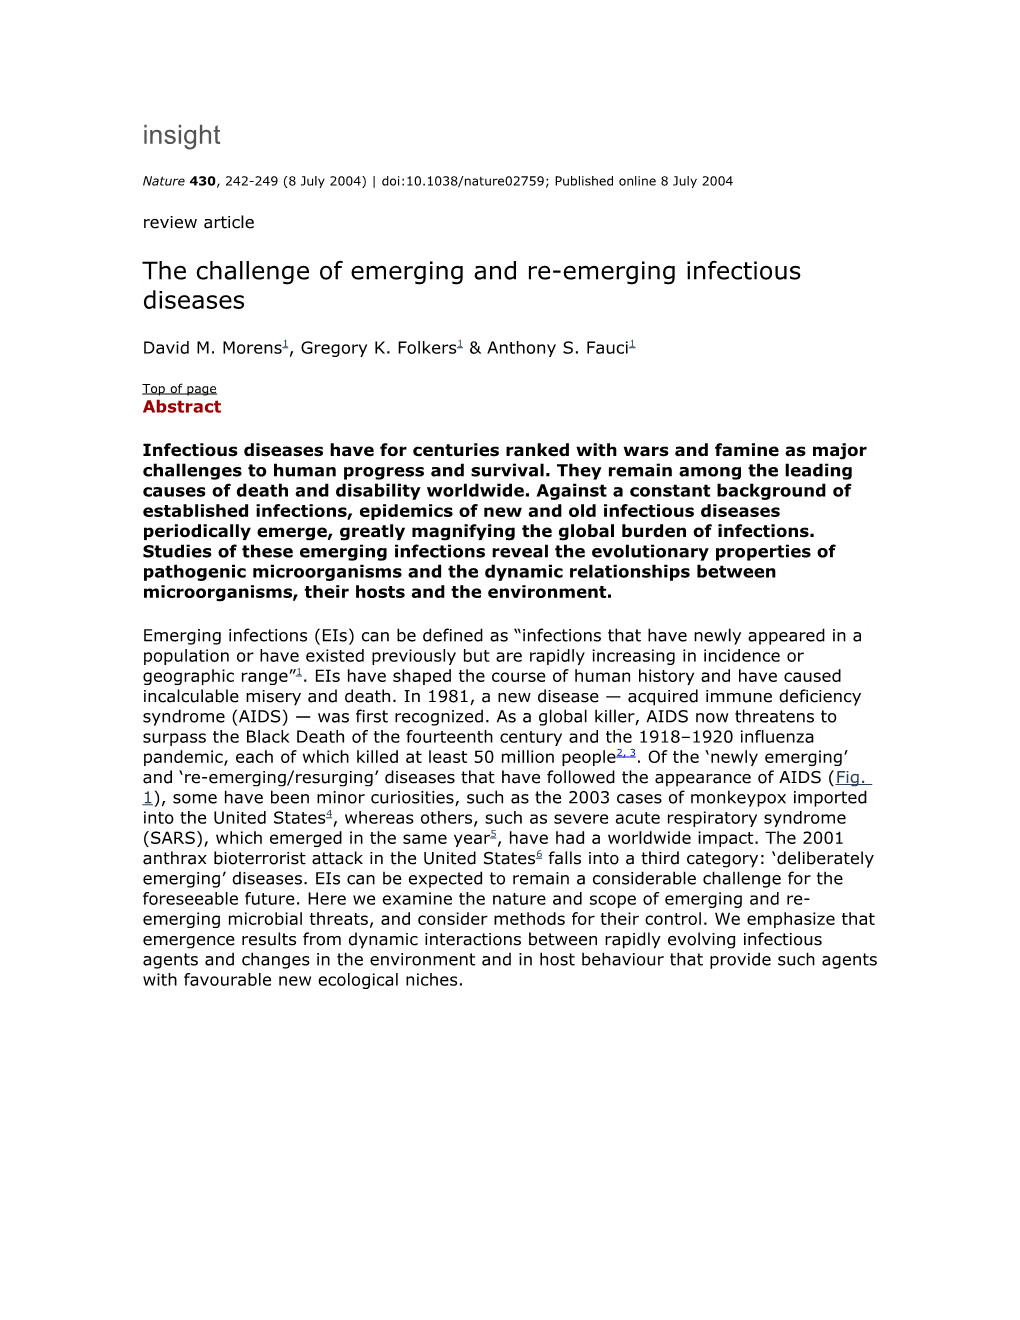 The Challenge of Emerging and Re-Emerging Infectious Diseases